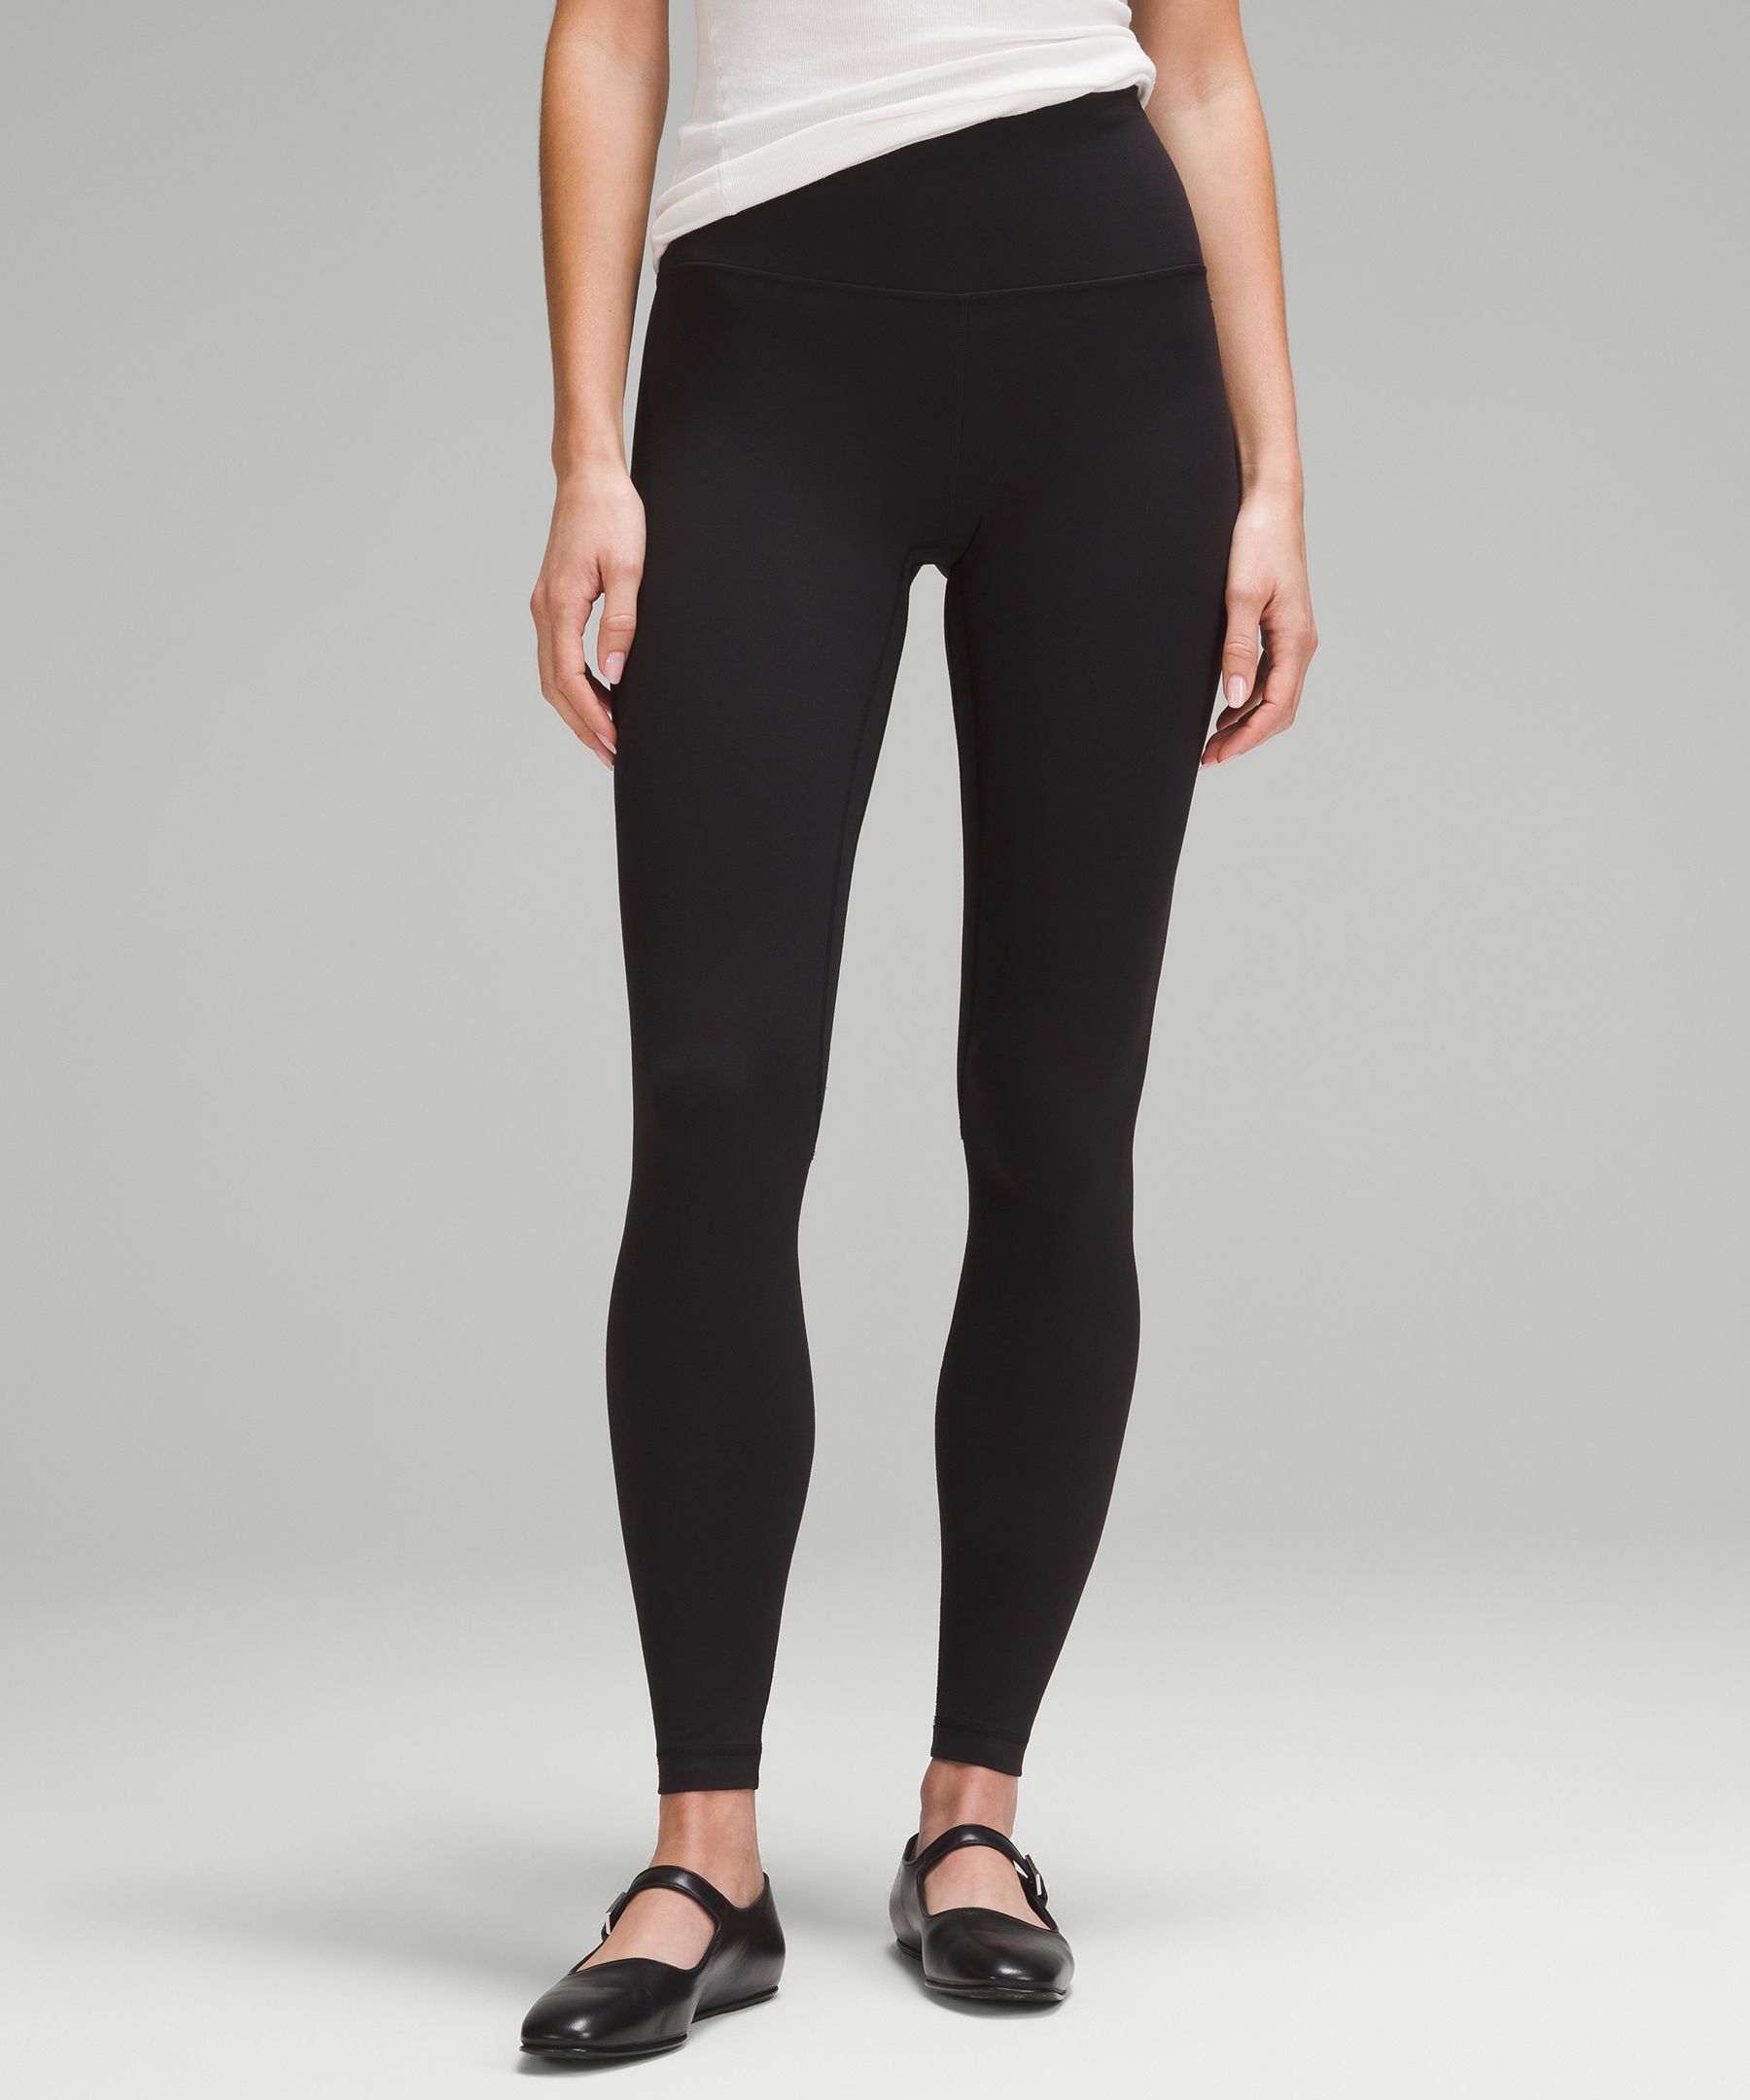 What's New in Activewear | lululemon